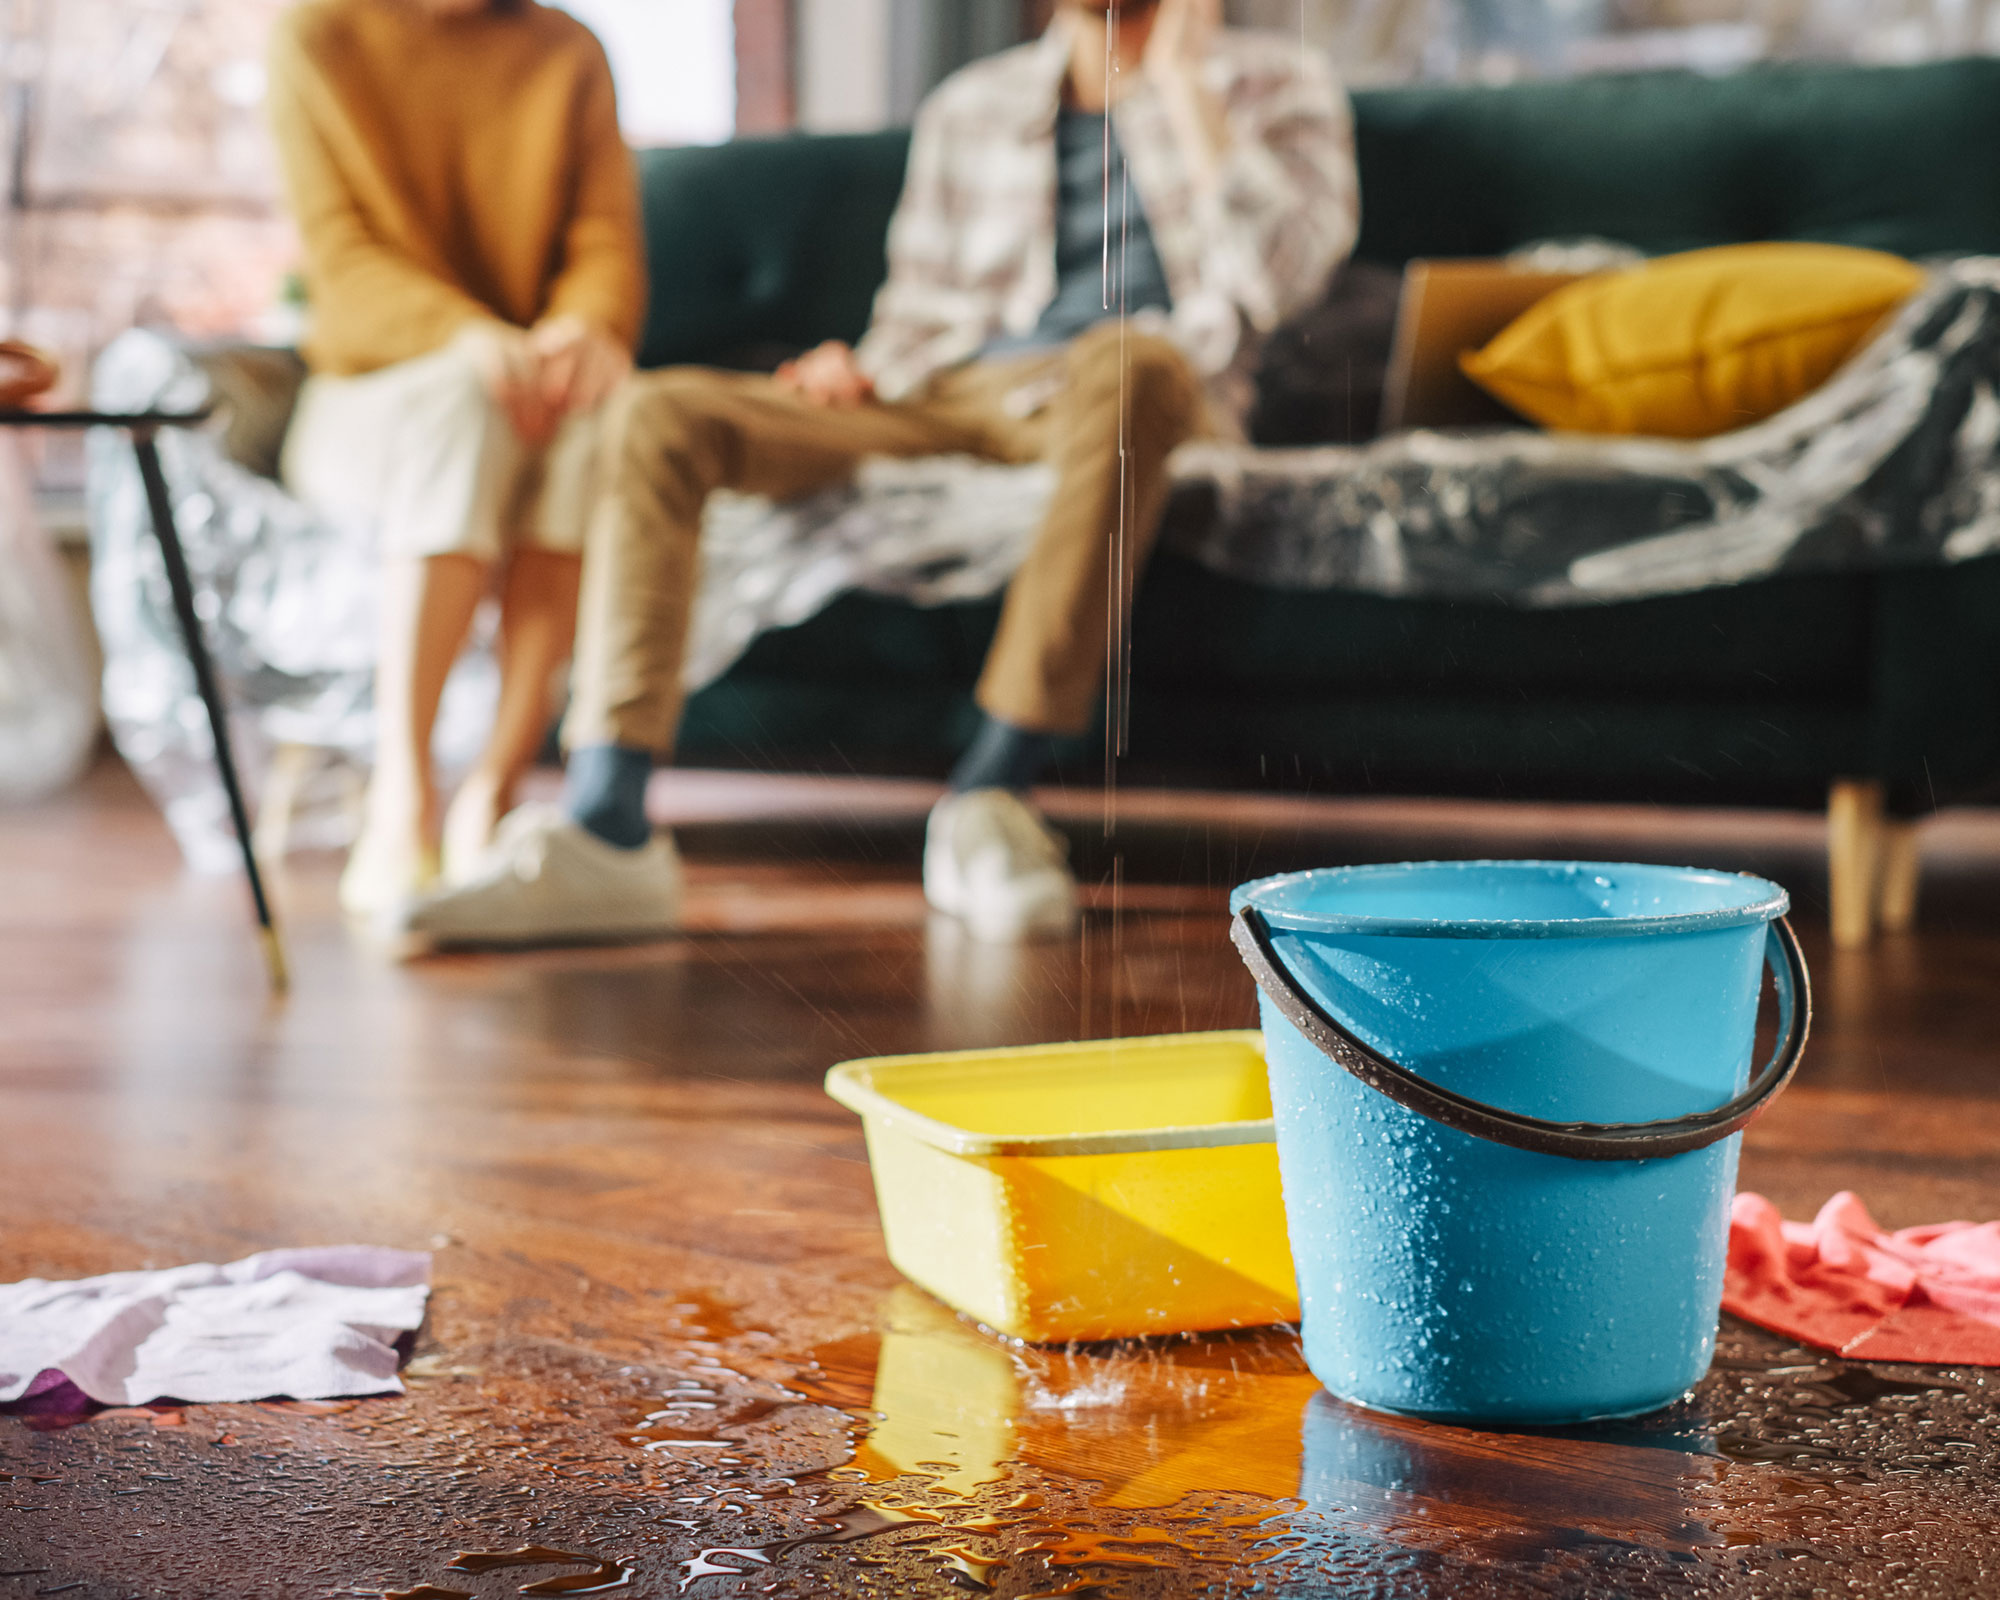 buckets catching leaks in a home with couple sitting on couch behind